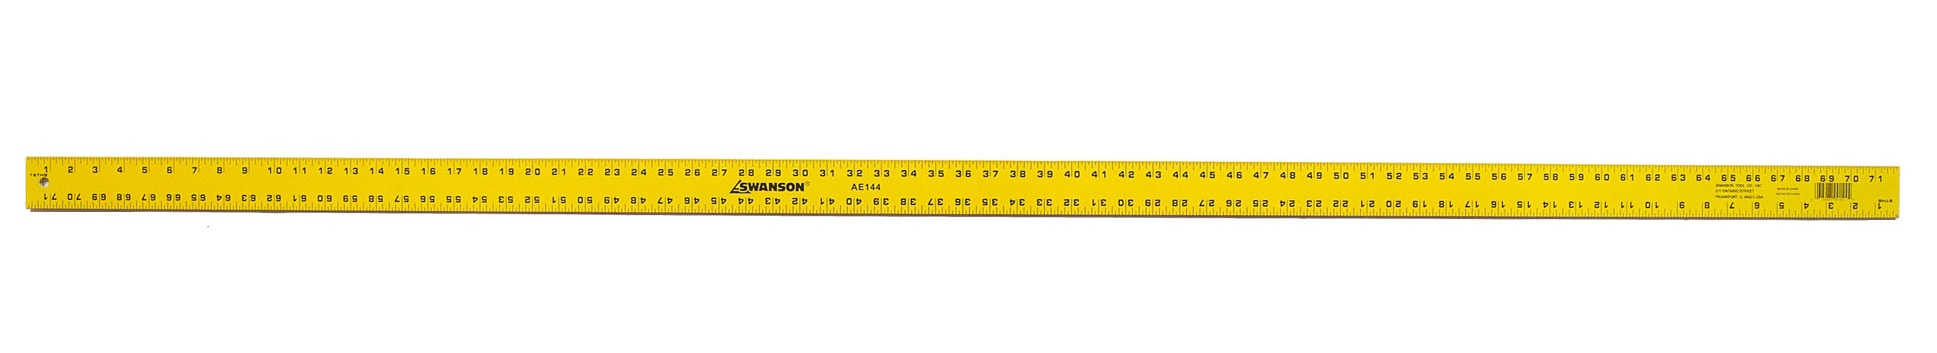 Jam Paper Stainless Steel 12-in Ruler - Black, Metal Yardstick - Durable, Accurate, and Stylish - Perfect for School, Office, and Crafts | 347M12BL